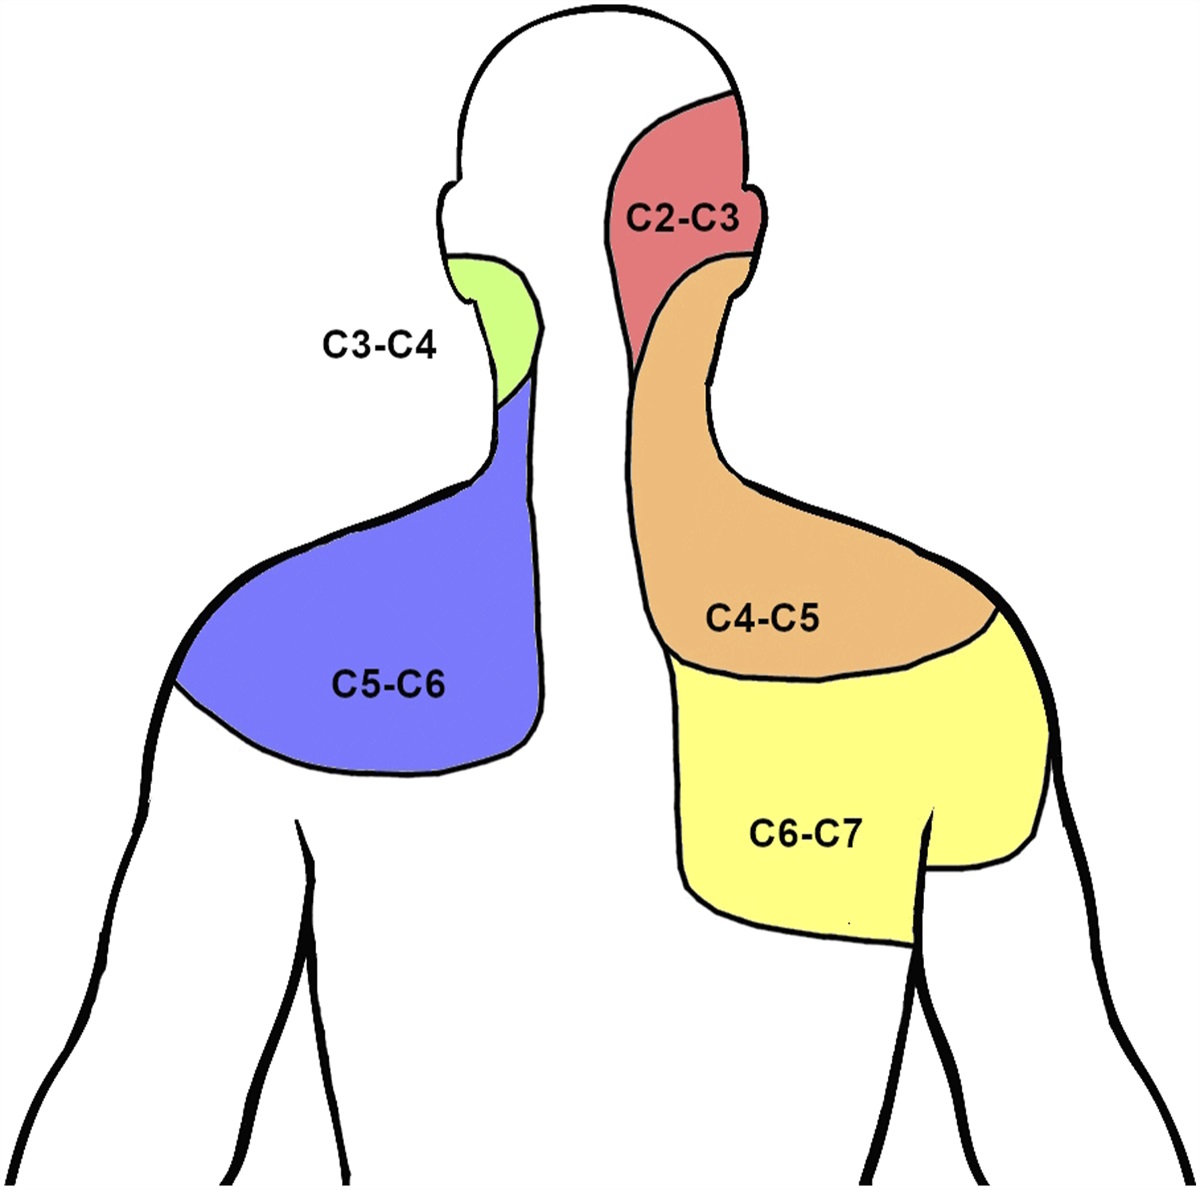 Clinical Diagnosis of Common Overlapping Shoulder and Cervical Spine Disorders: A Review of Current Evidence